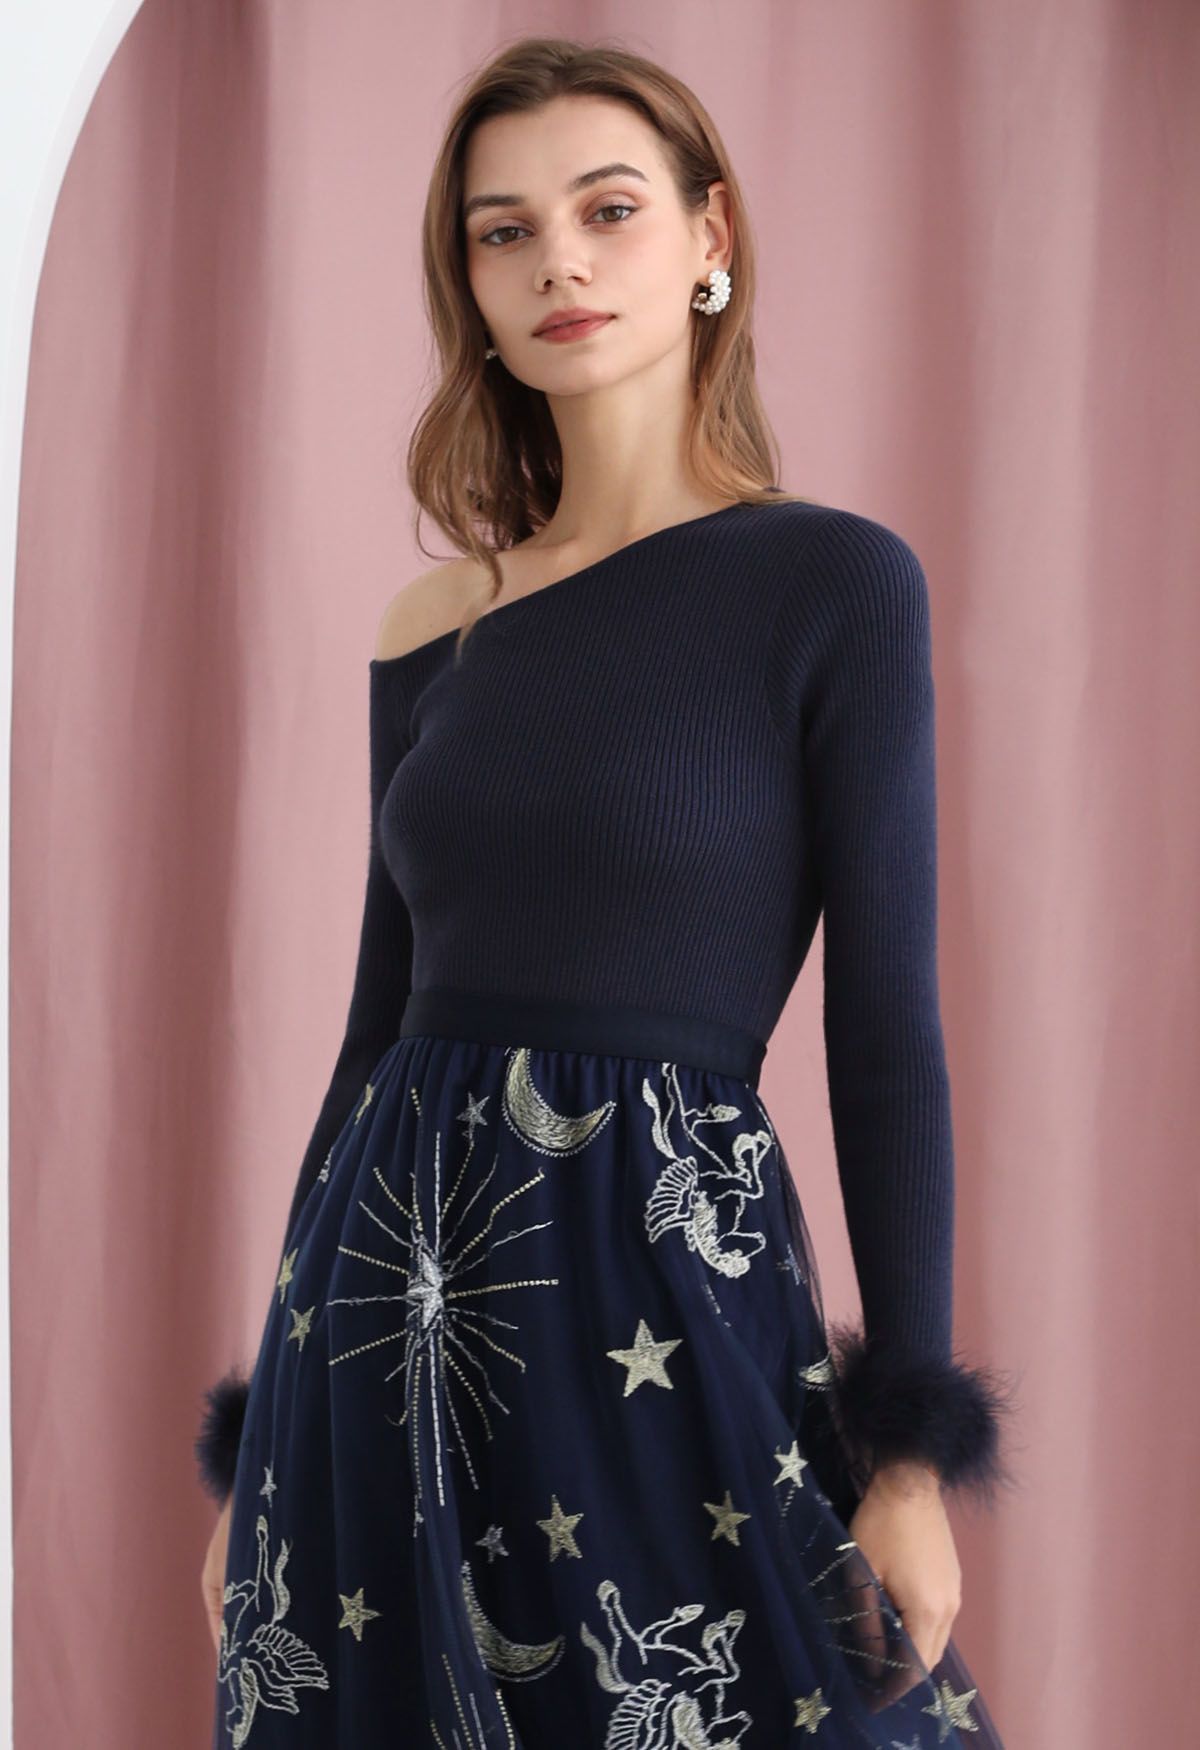 One-Shoulder Feathered Cuffs Knit Top in Navy